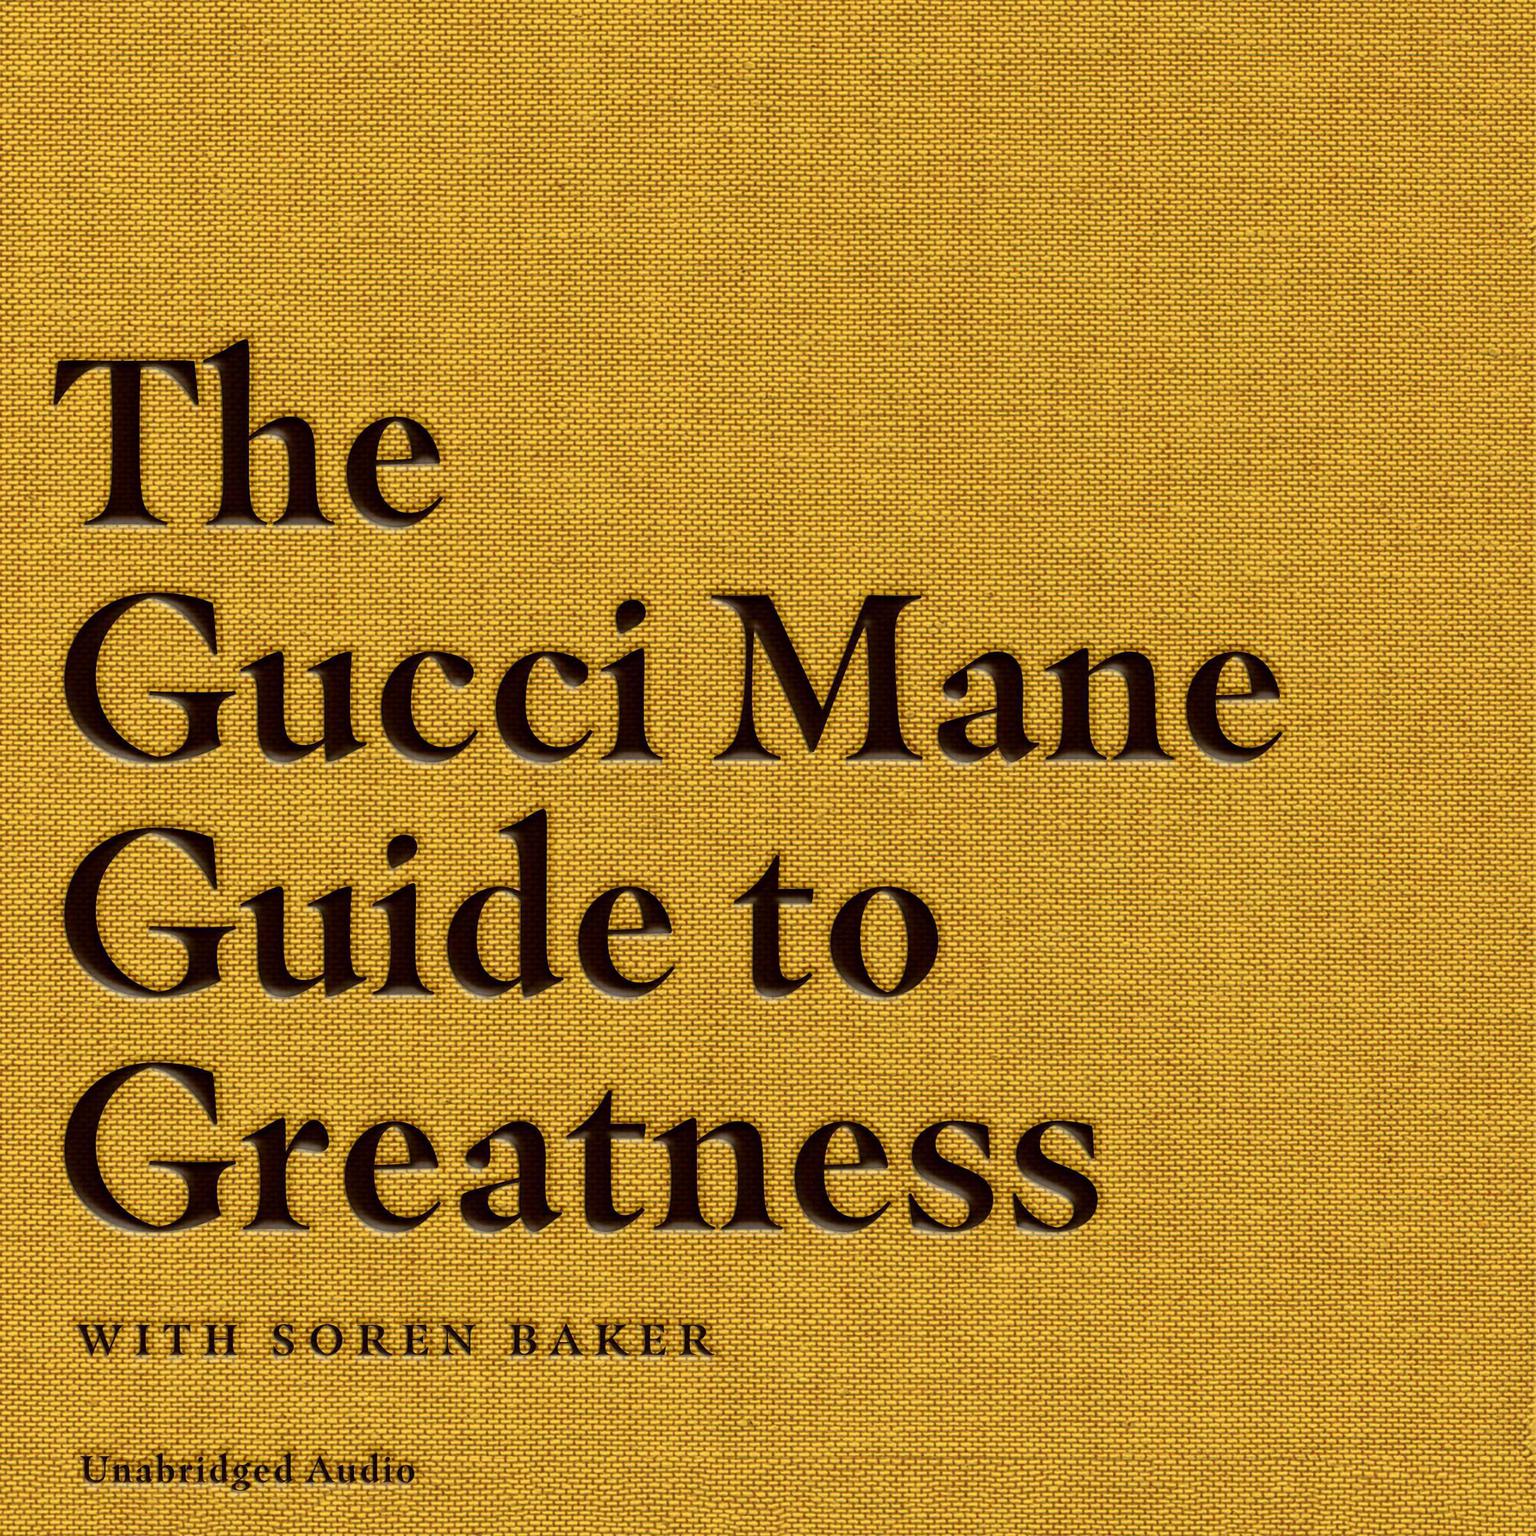 The Gucci Mane Guide to Greatness Audiobook, by Gucci Mane